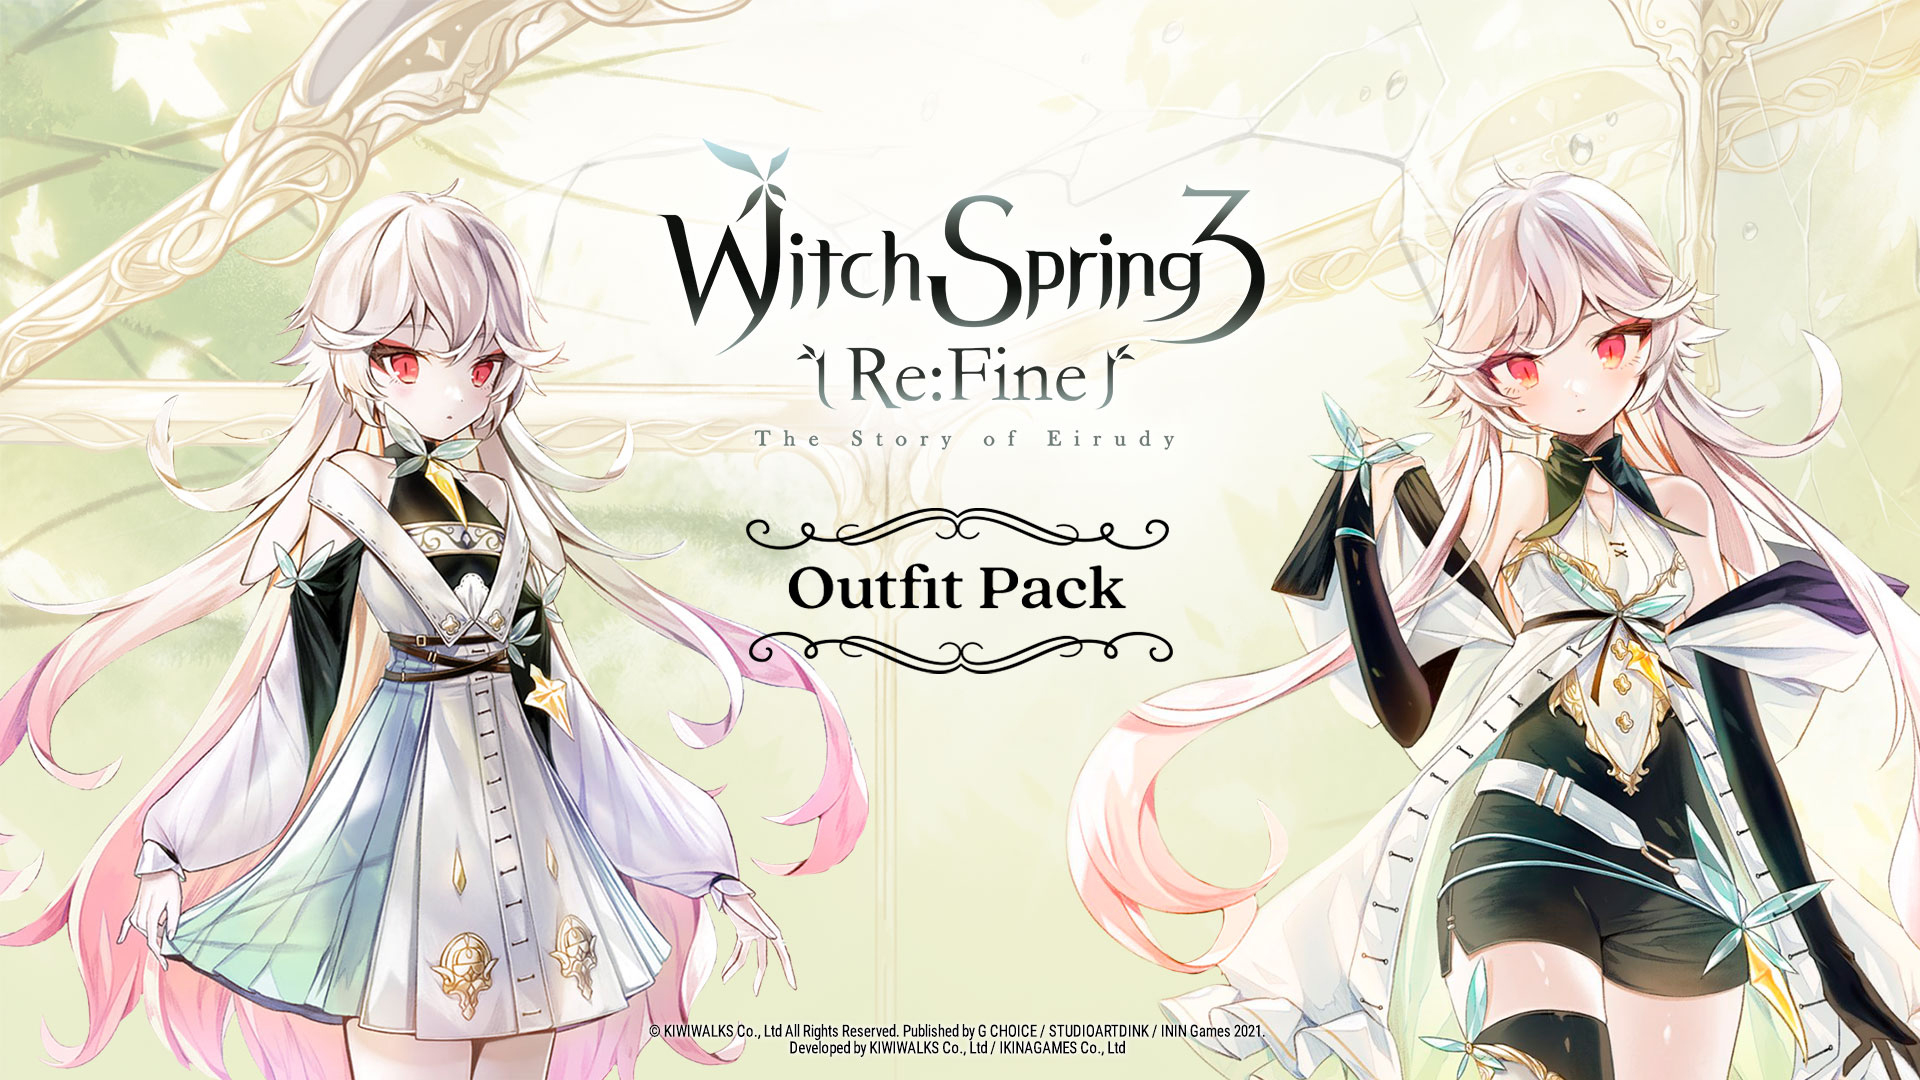 WitchSpring3 Re:Fine Outfit Pack